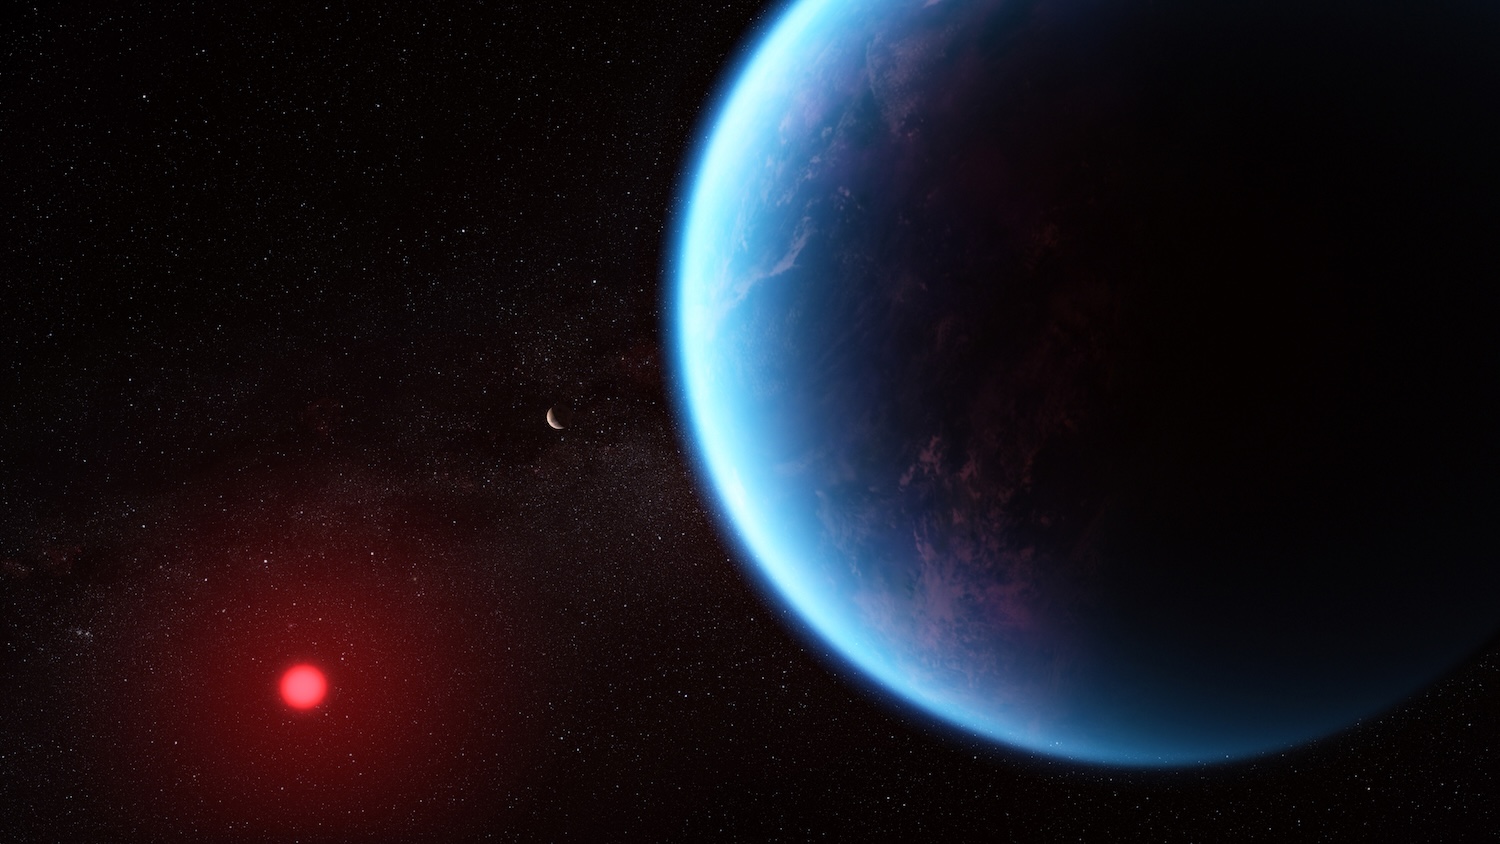 Exoplanet K2-18b: Potential for an Ocean Planet with a Hydrogen-Rich Atmosphere